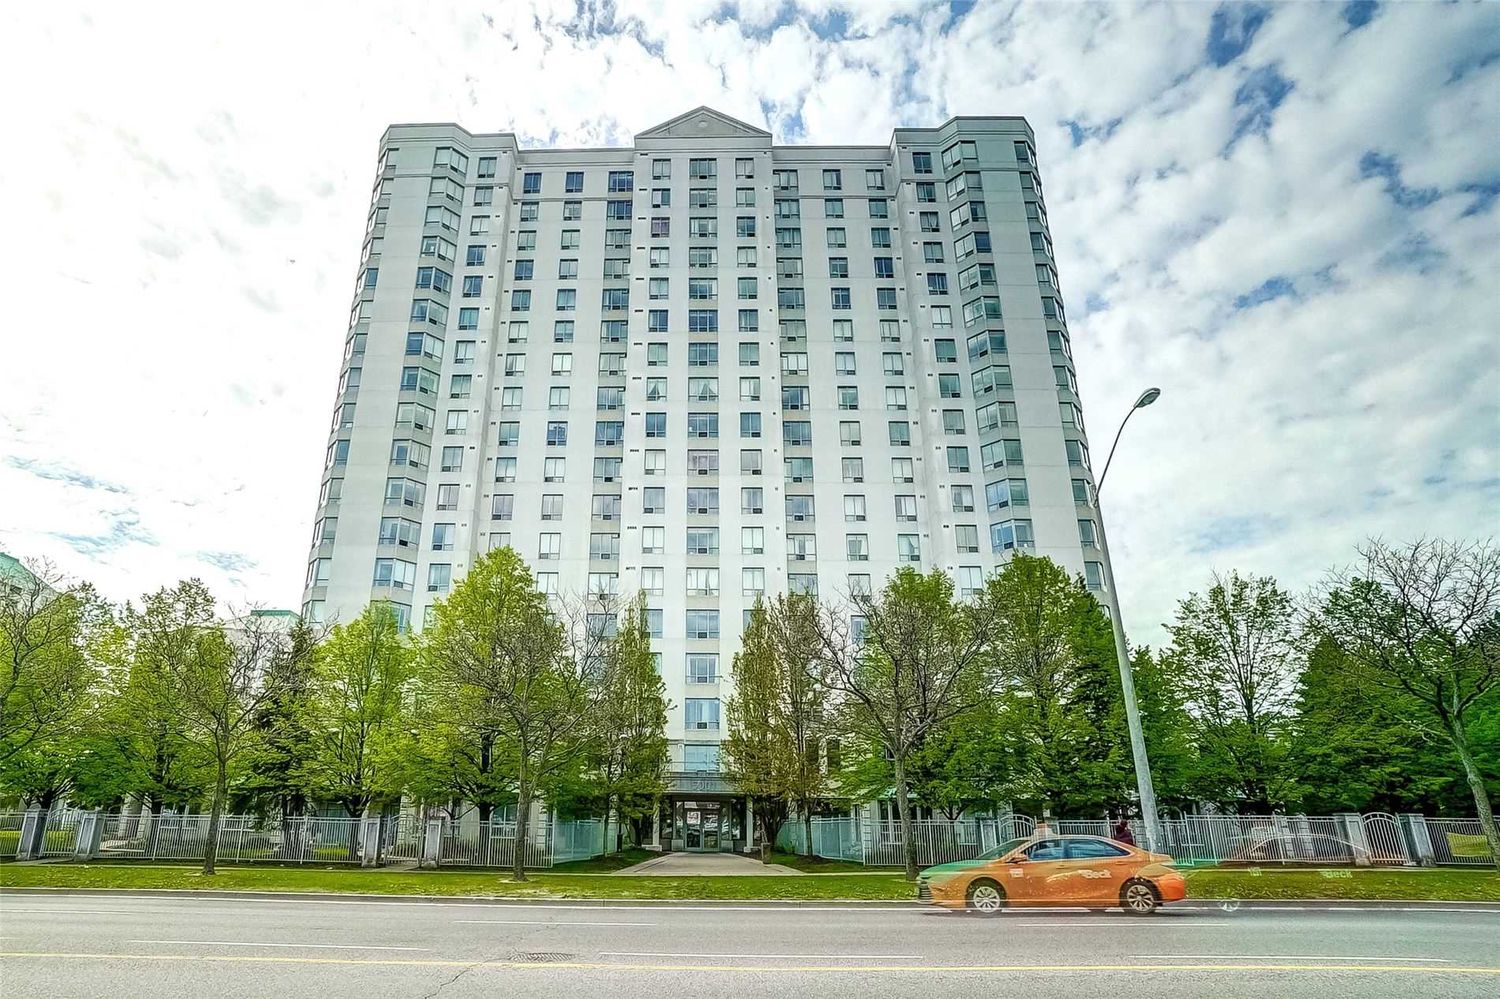 5001 Finch Avenue E. The Chartwell Condos is located in  Scarborough, Toronto - image #2 of 3